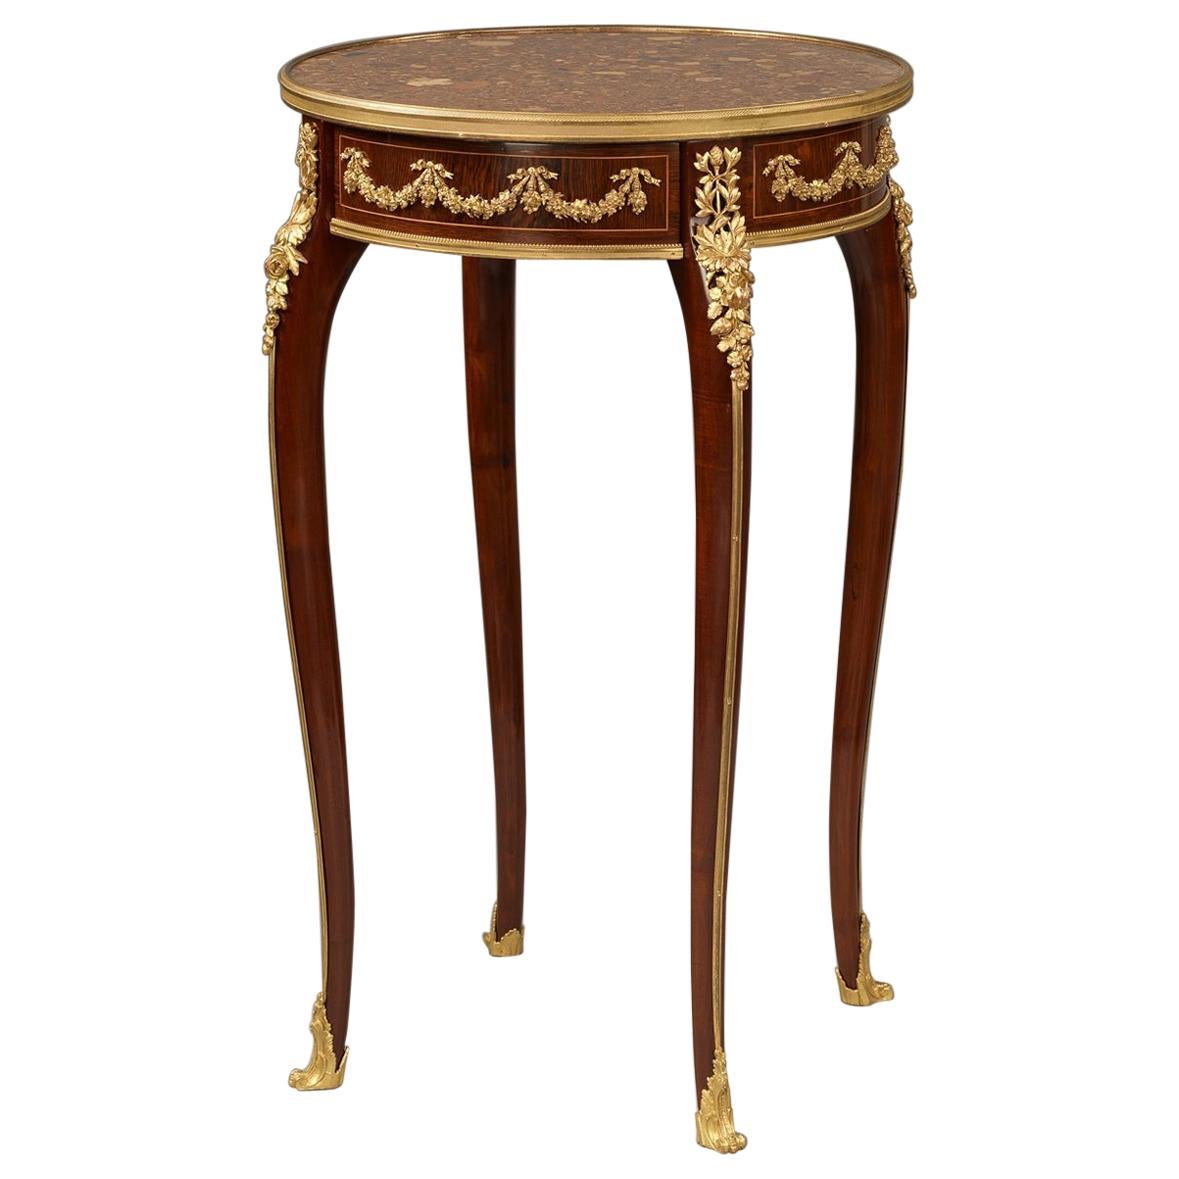 Mahogany Table with Marble Top Attributed to François Linke, French, circa 1890